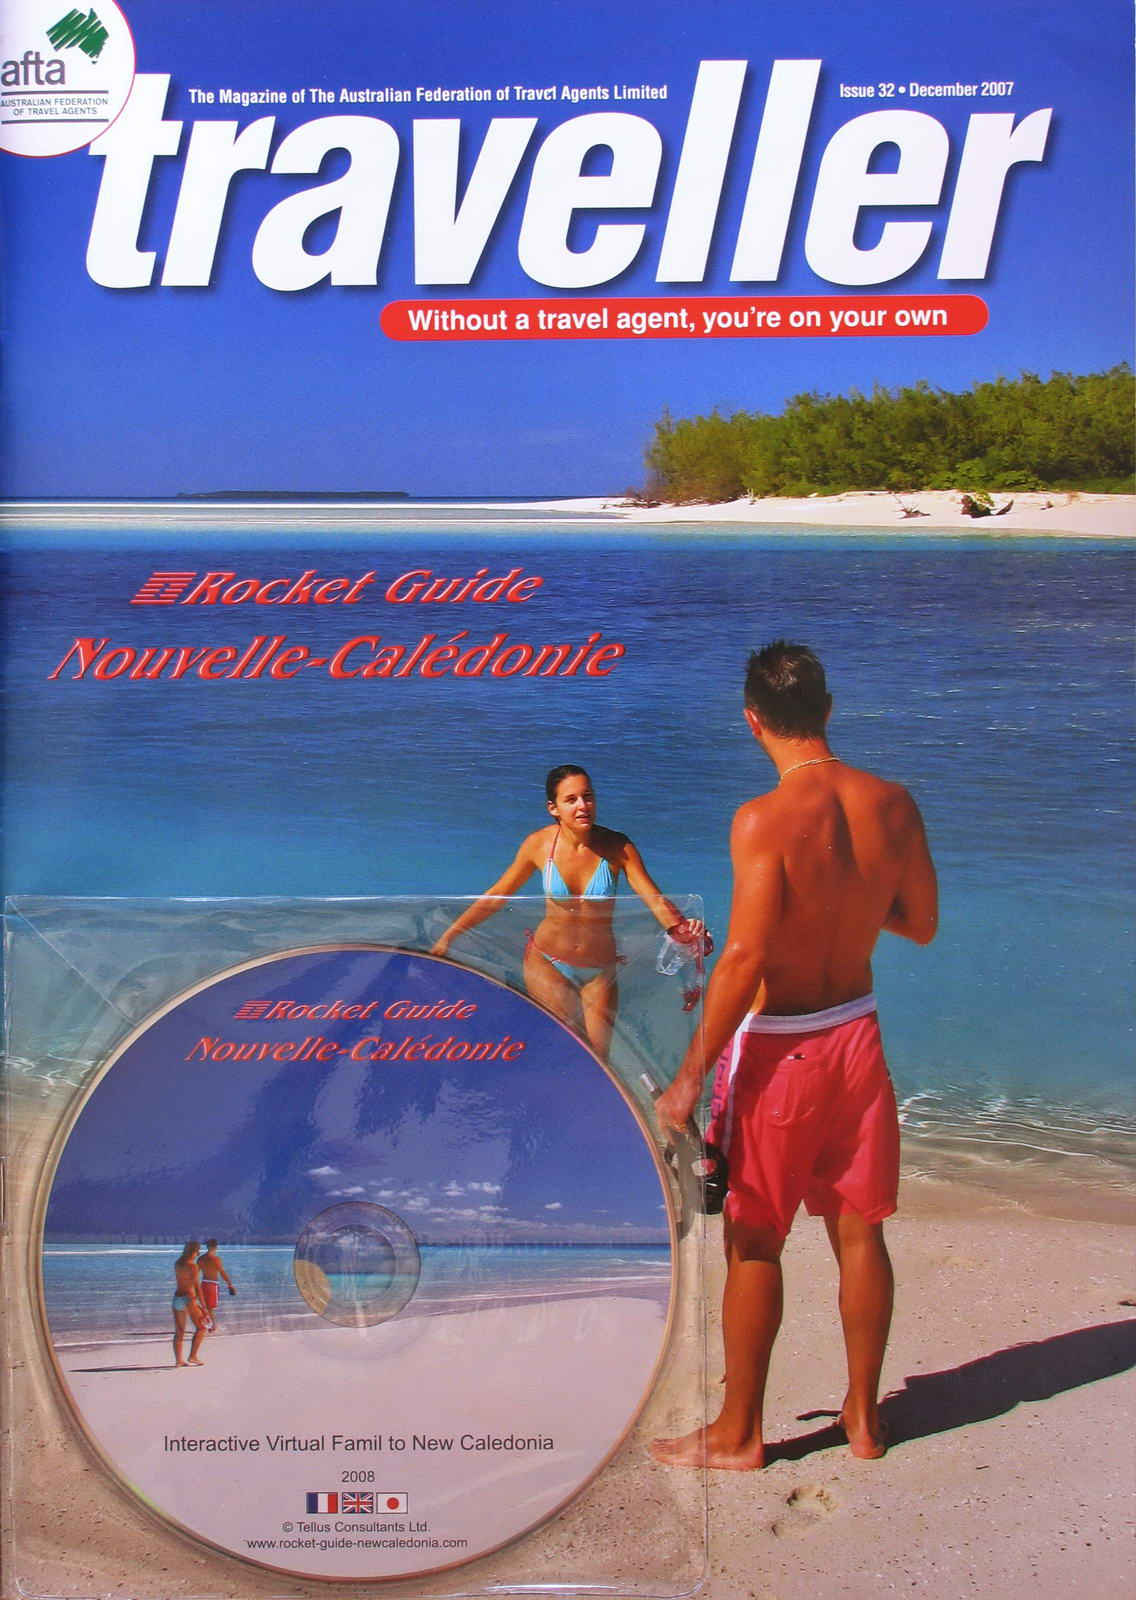 The Australian Traveller Magazine for Travel Agents special Rocket Travel Guide to New Caledonia Issue